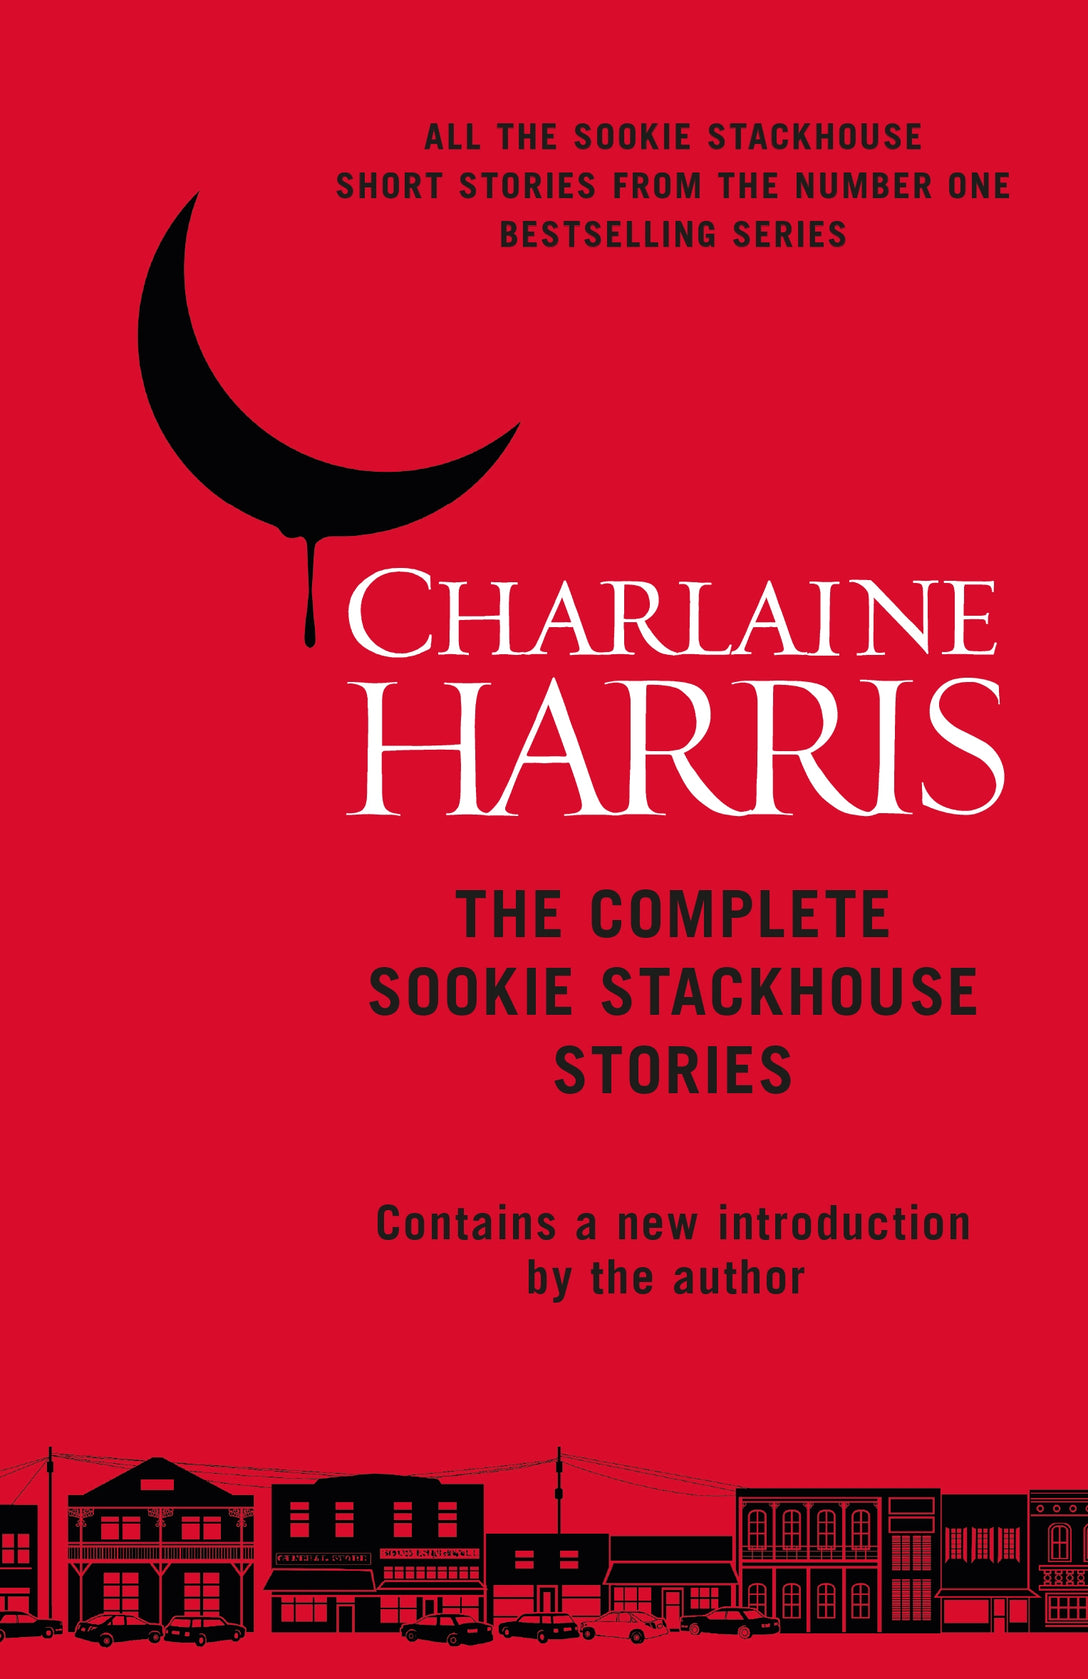 The Complete Sookie Stackhouse Stories by Charlaine Harris